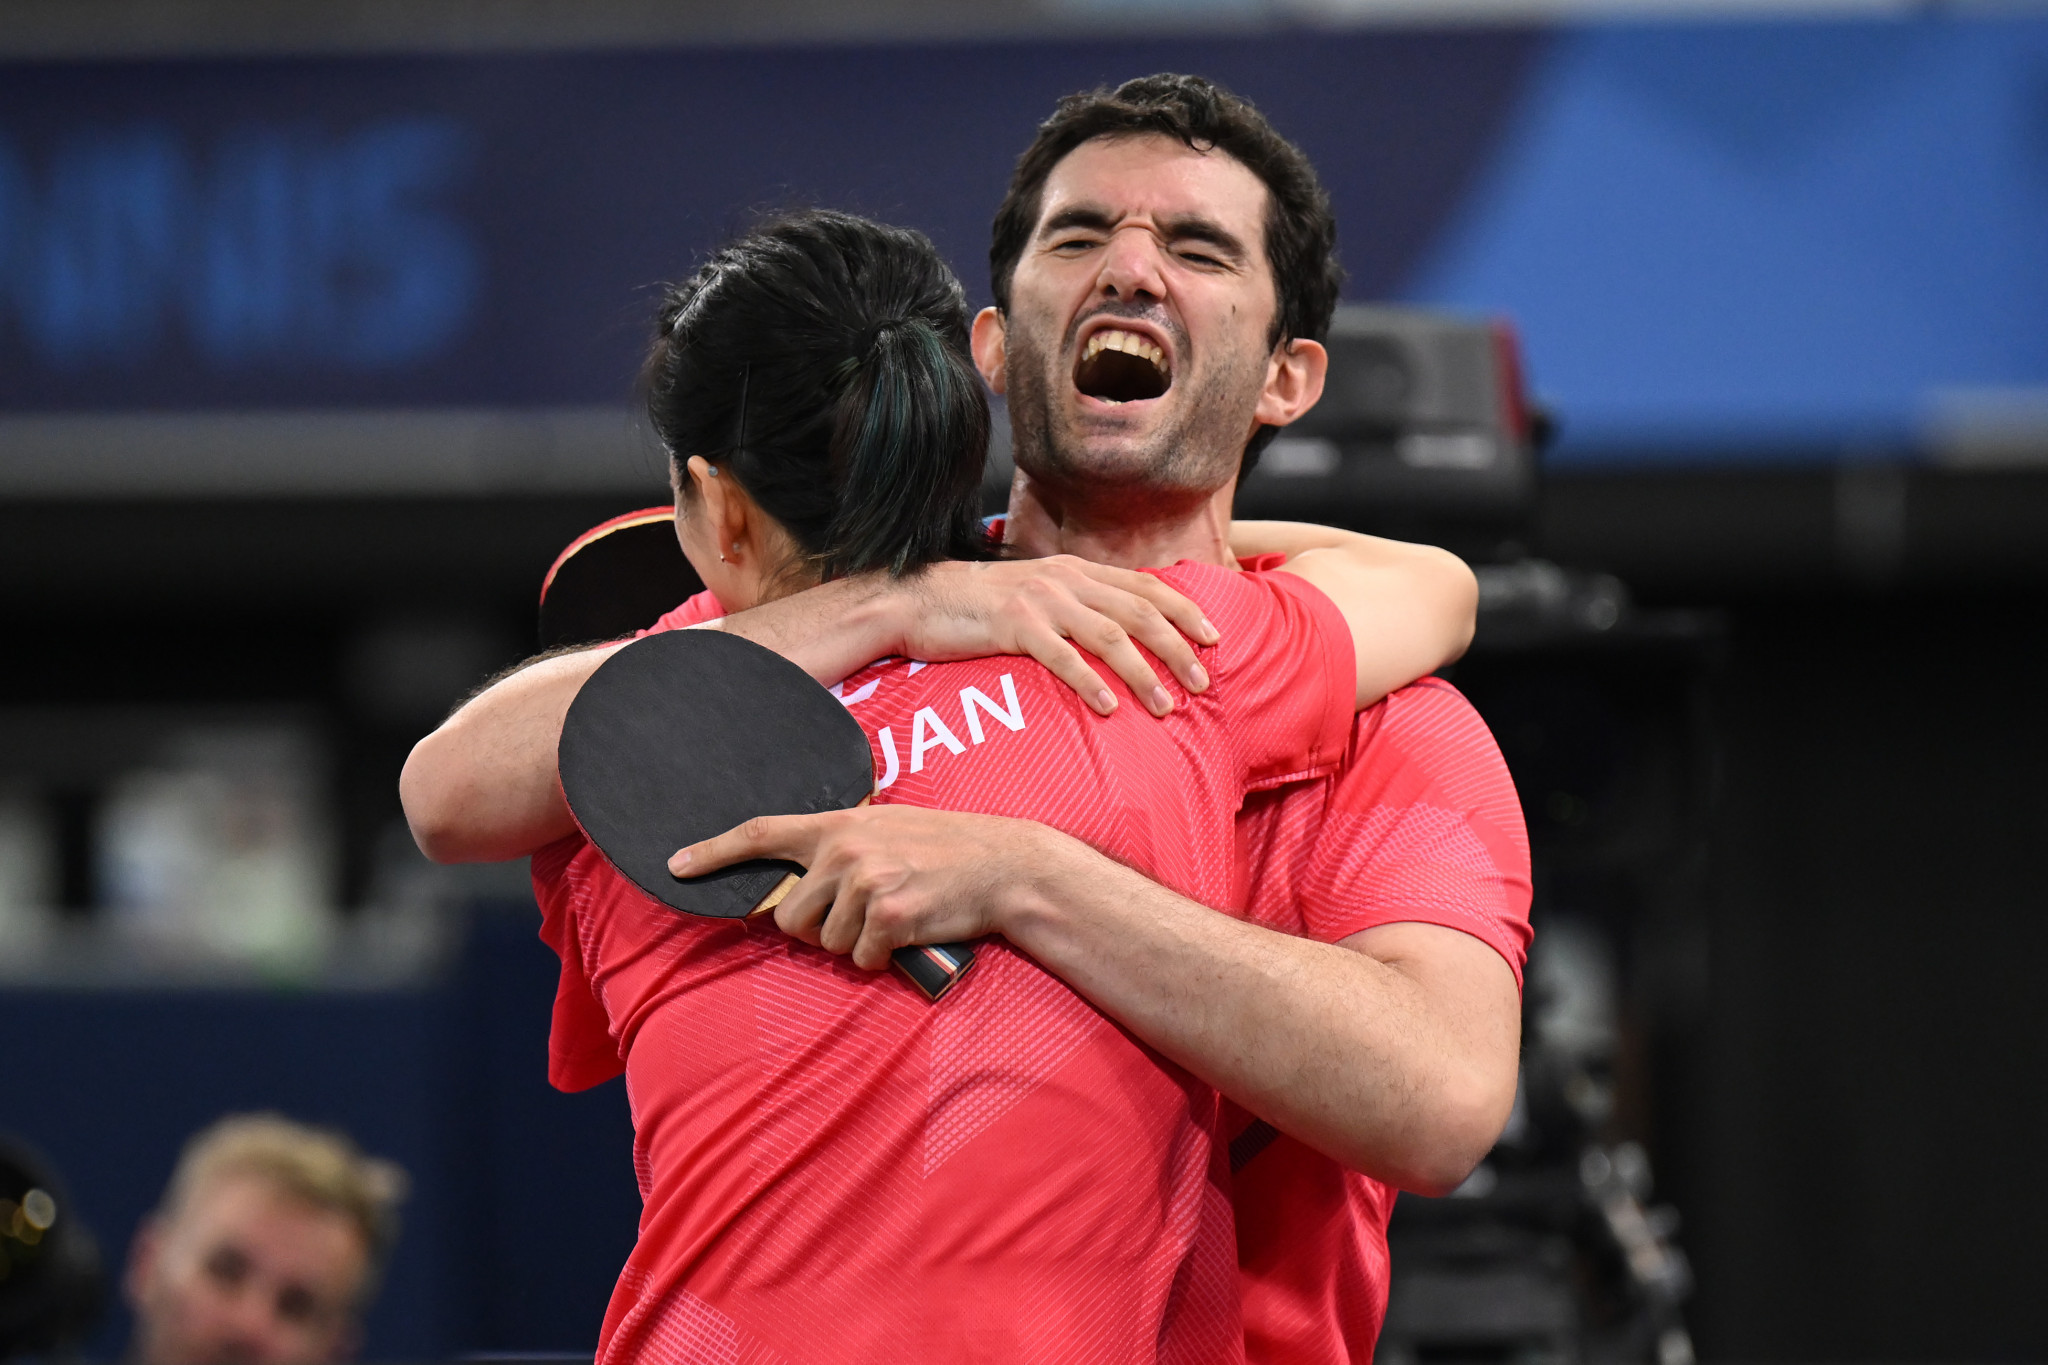 Emmanuel Lebesson and Yuan Jianan paired to win the mixed doubles event in table tennis ©Getty Images